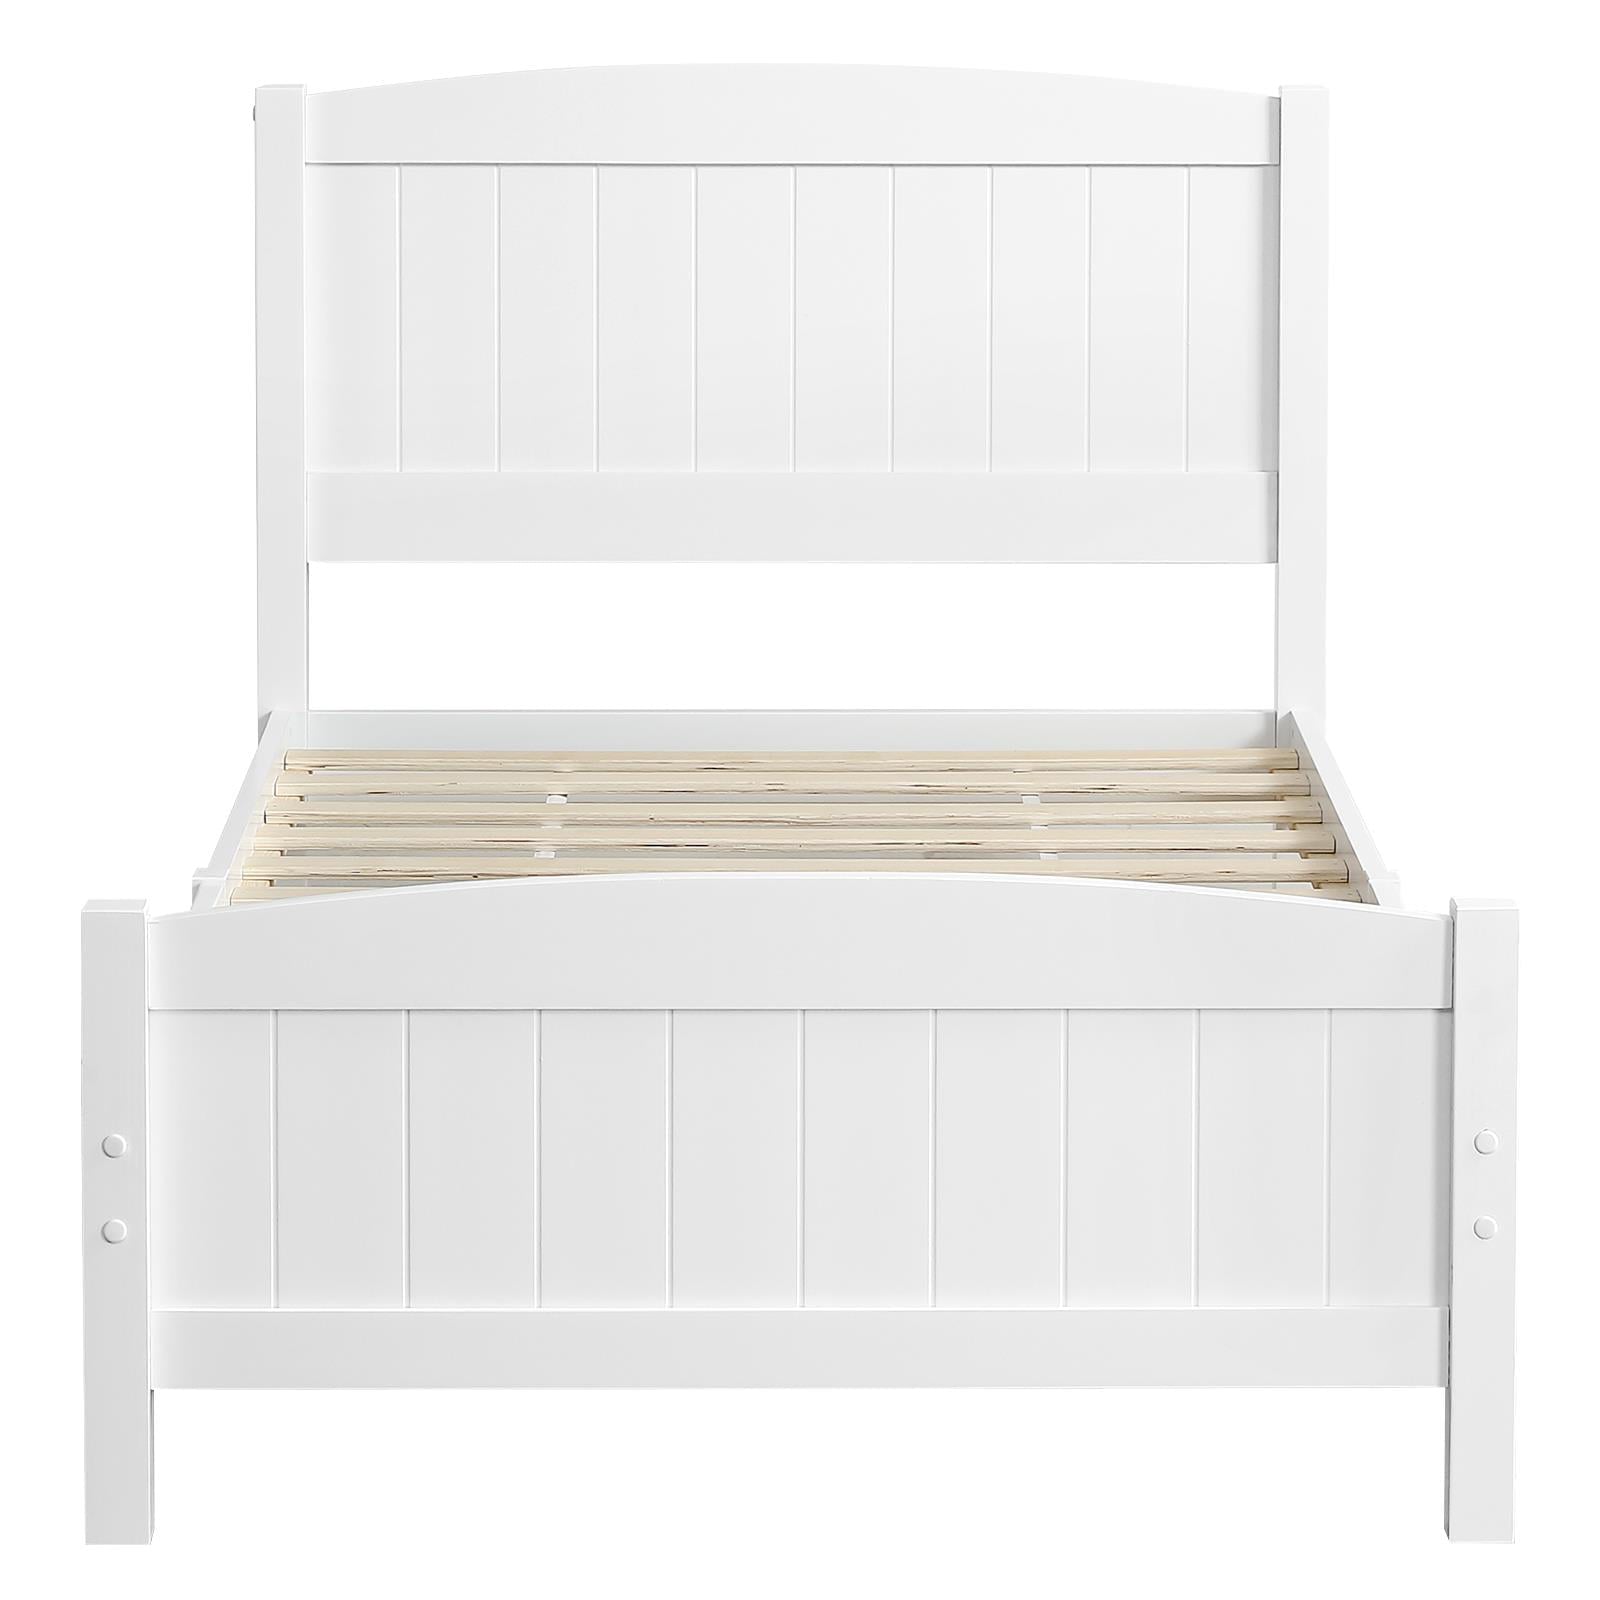 Zimtown Twin Bed Frame,Solid Pine Wood Kids Twin Platform Bed Frame, Bedroom Twin Bed with Headboard for Adults, White